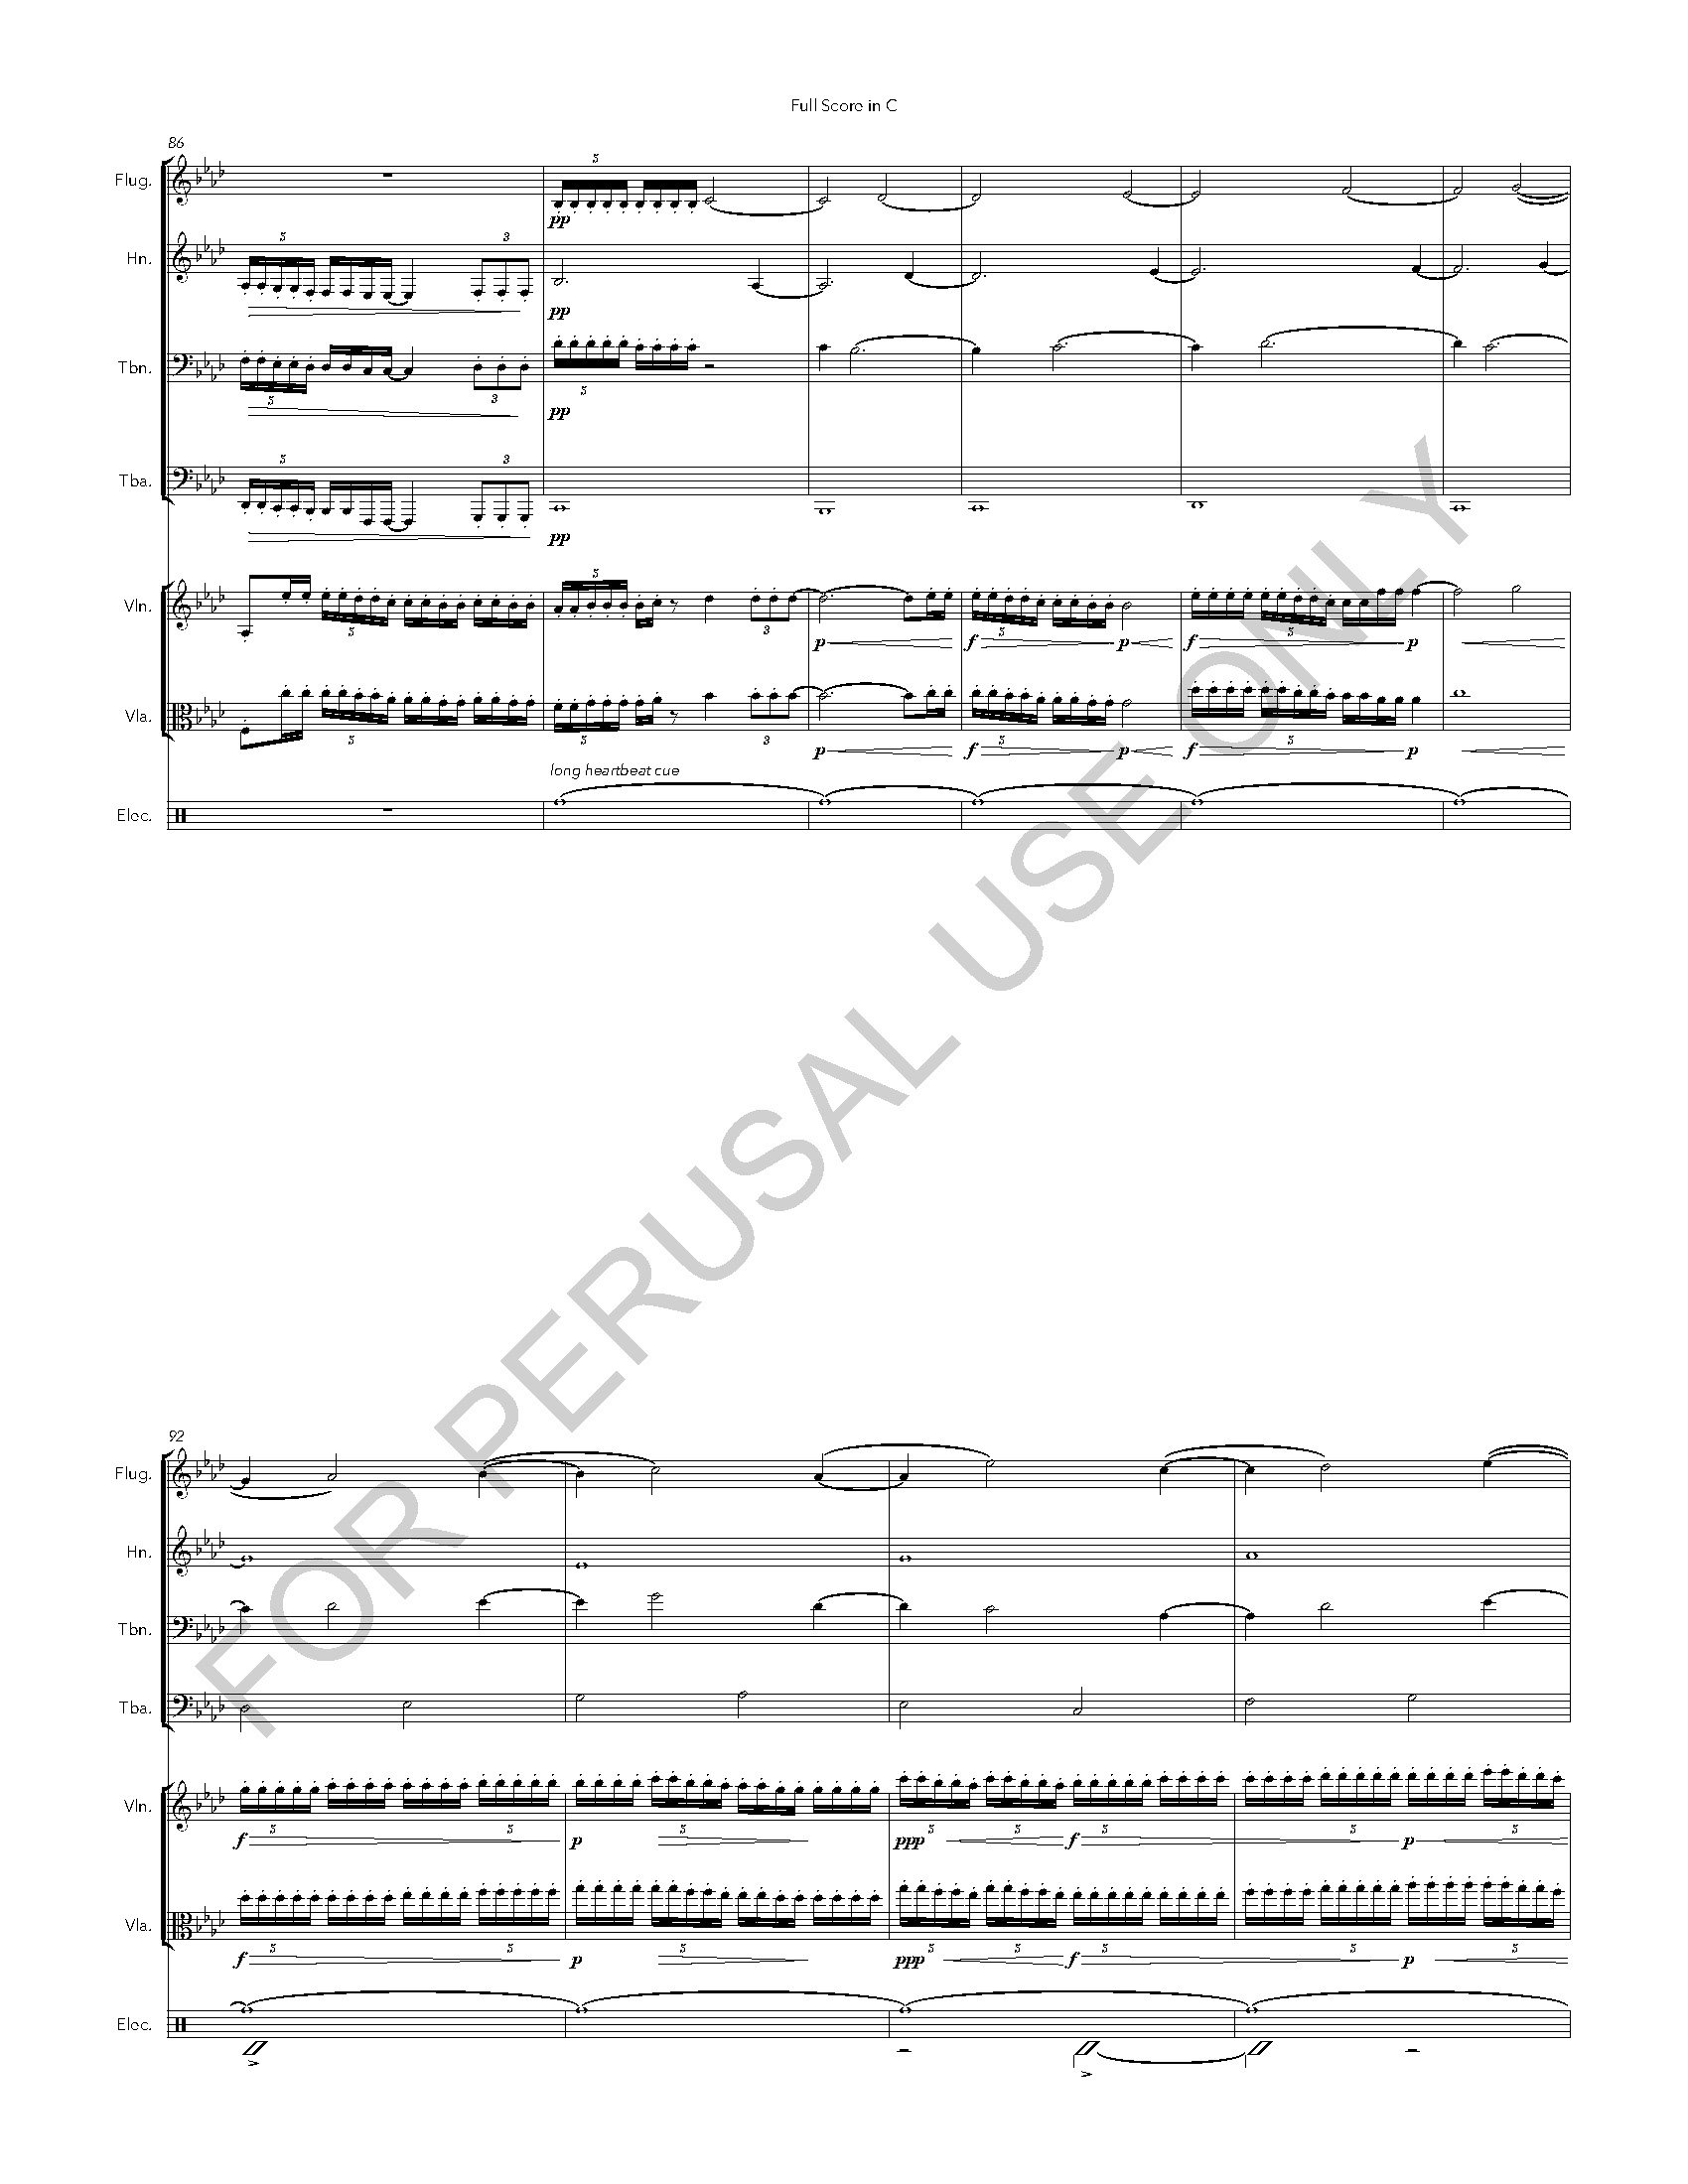 The Other Side of the Sky Full Score in C_Page_08.jpg